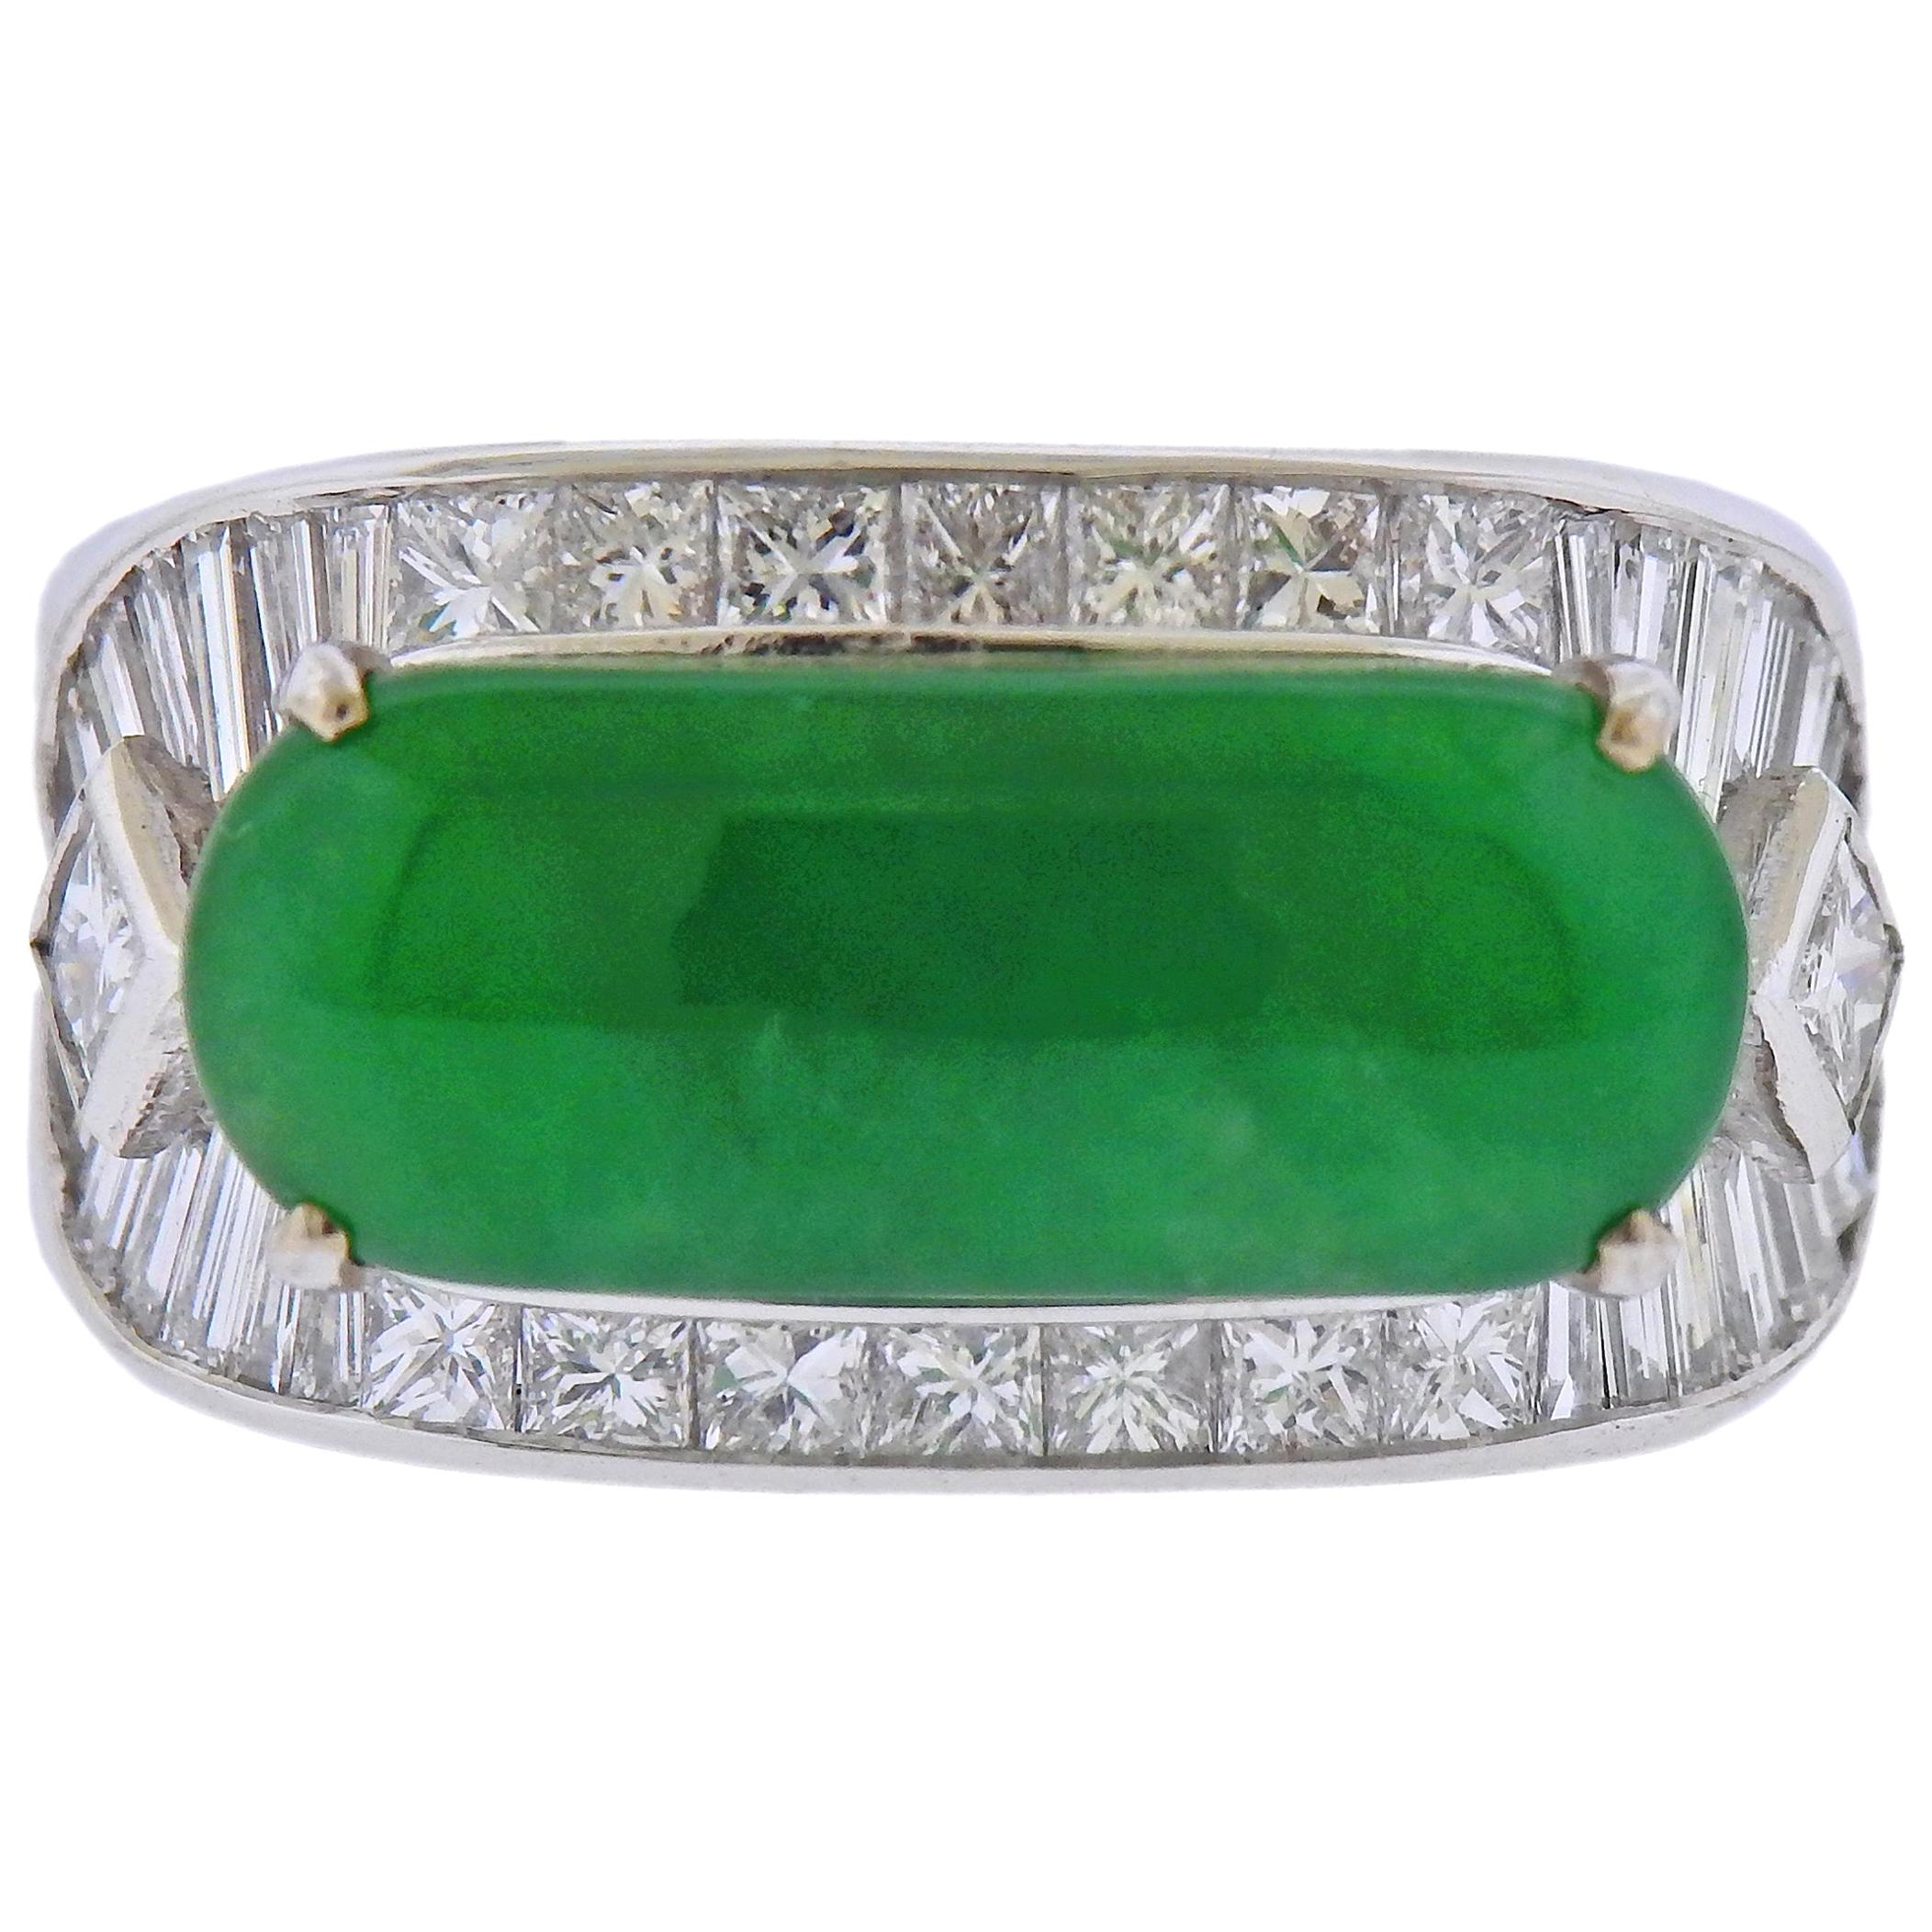 How much is a jade ring?